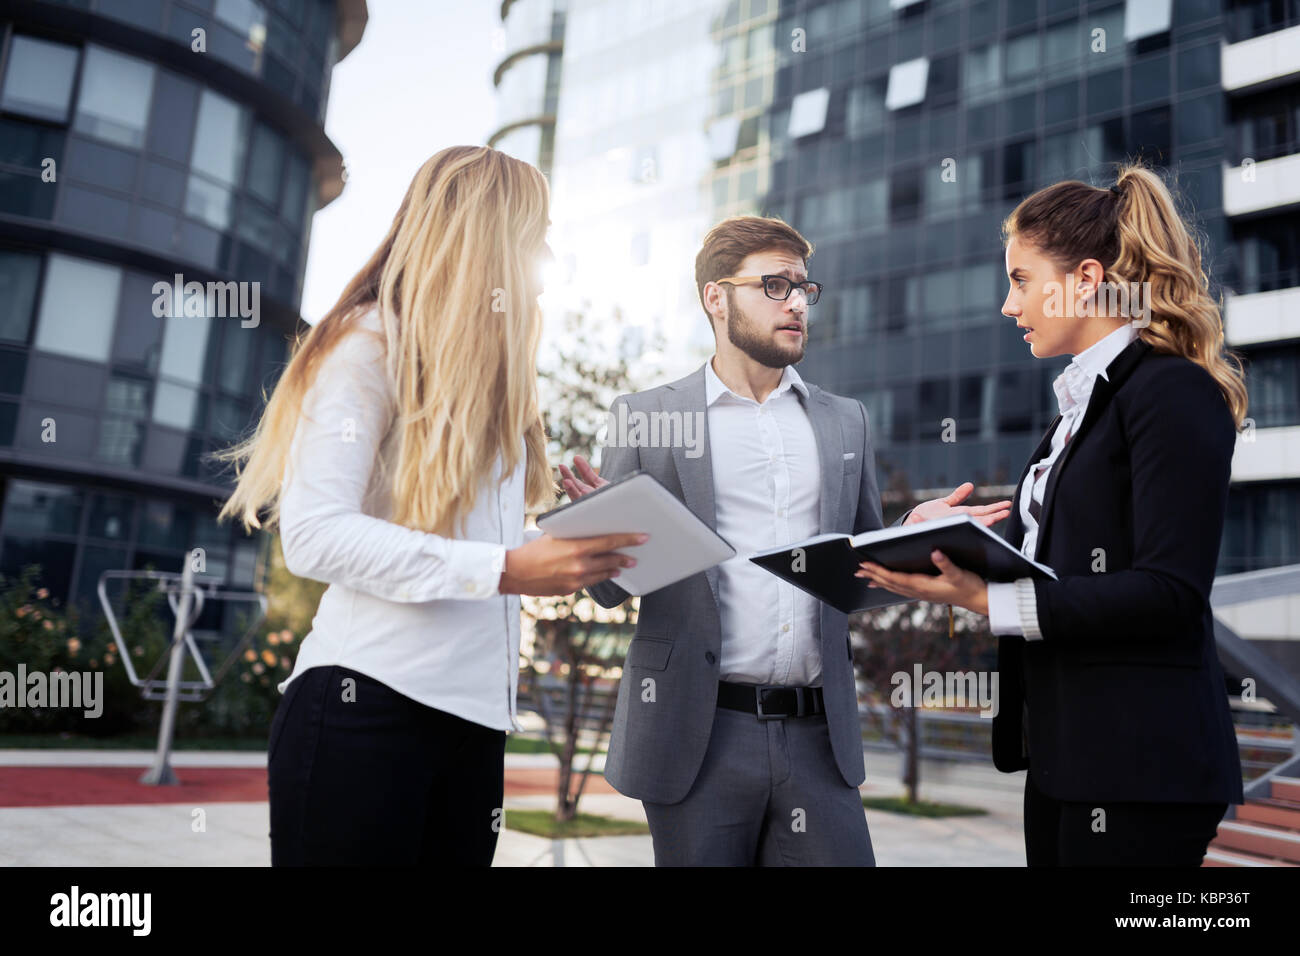 Overworked stressful businessperson Stock Photo